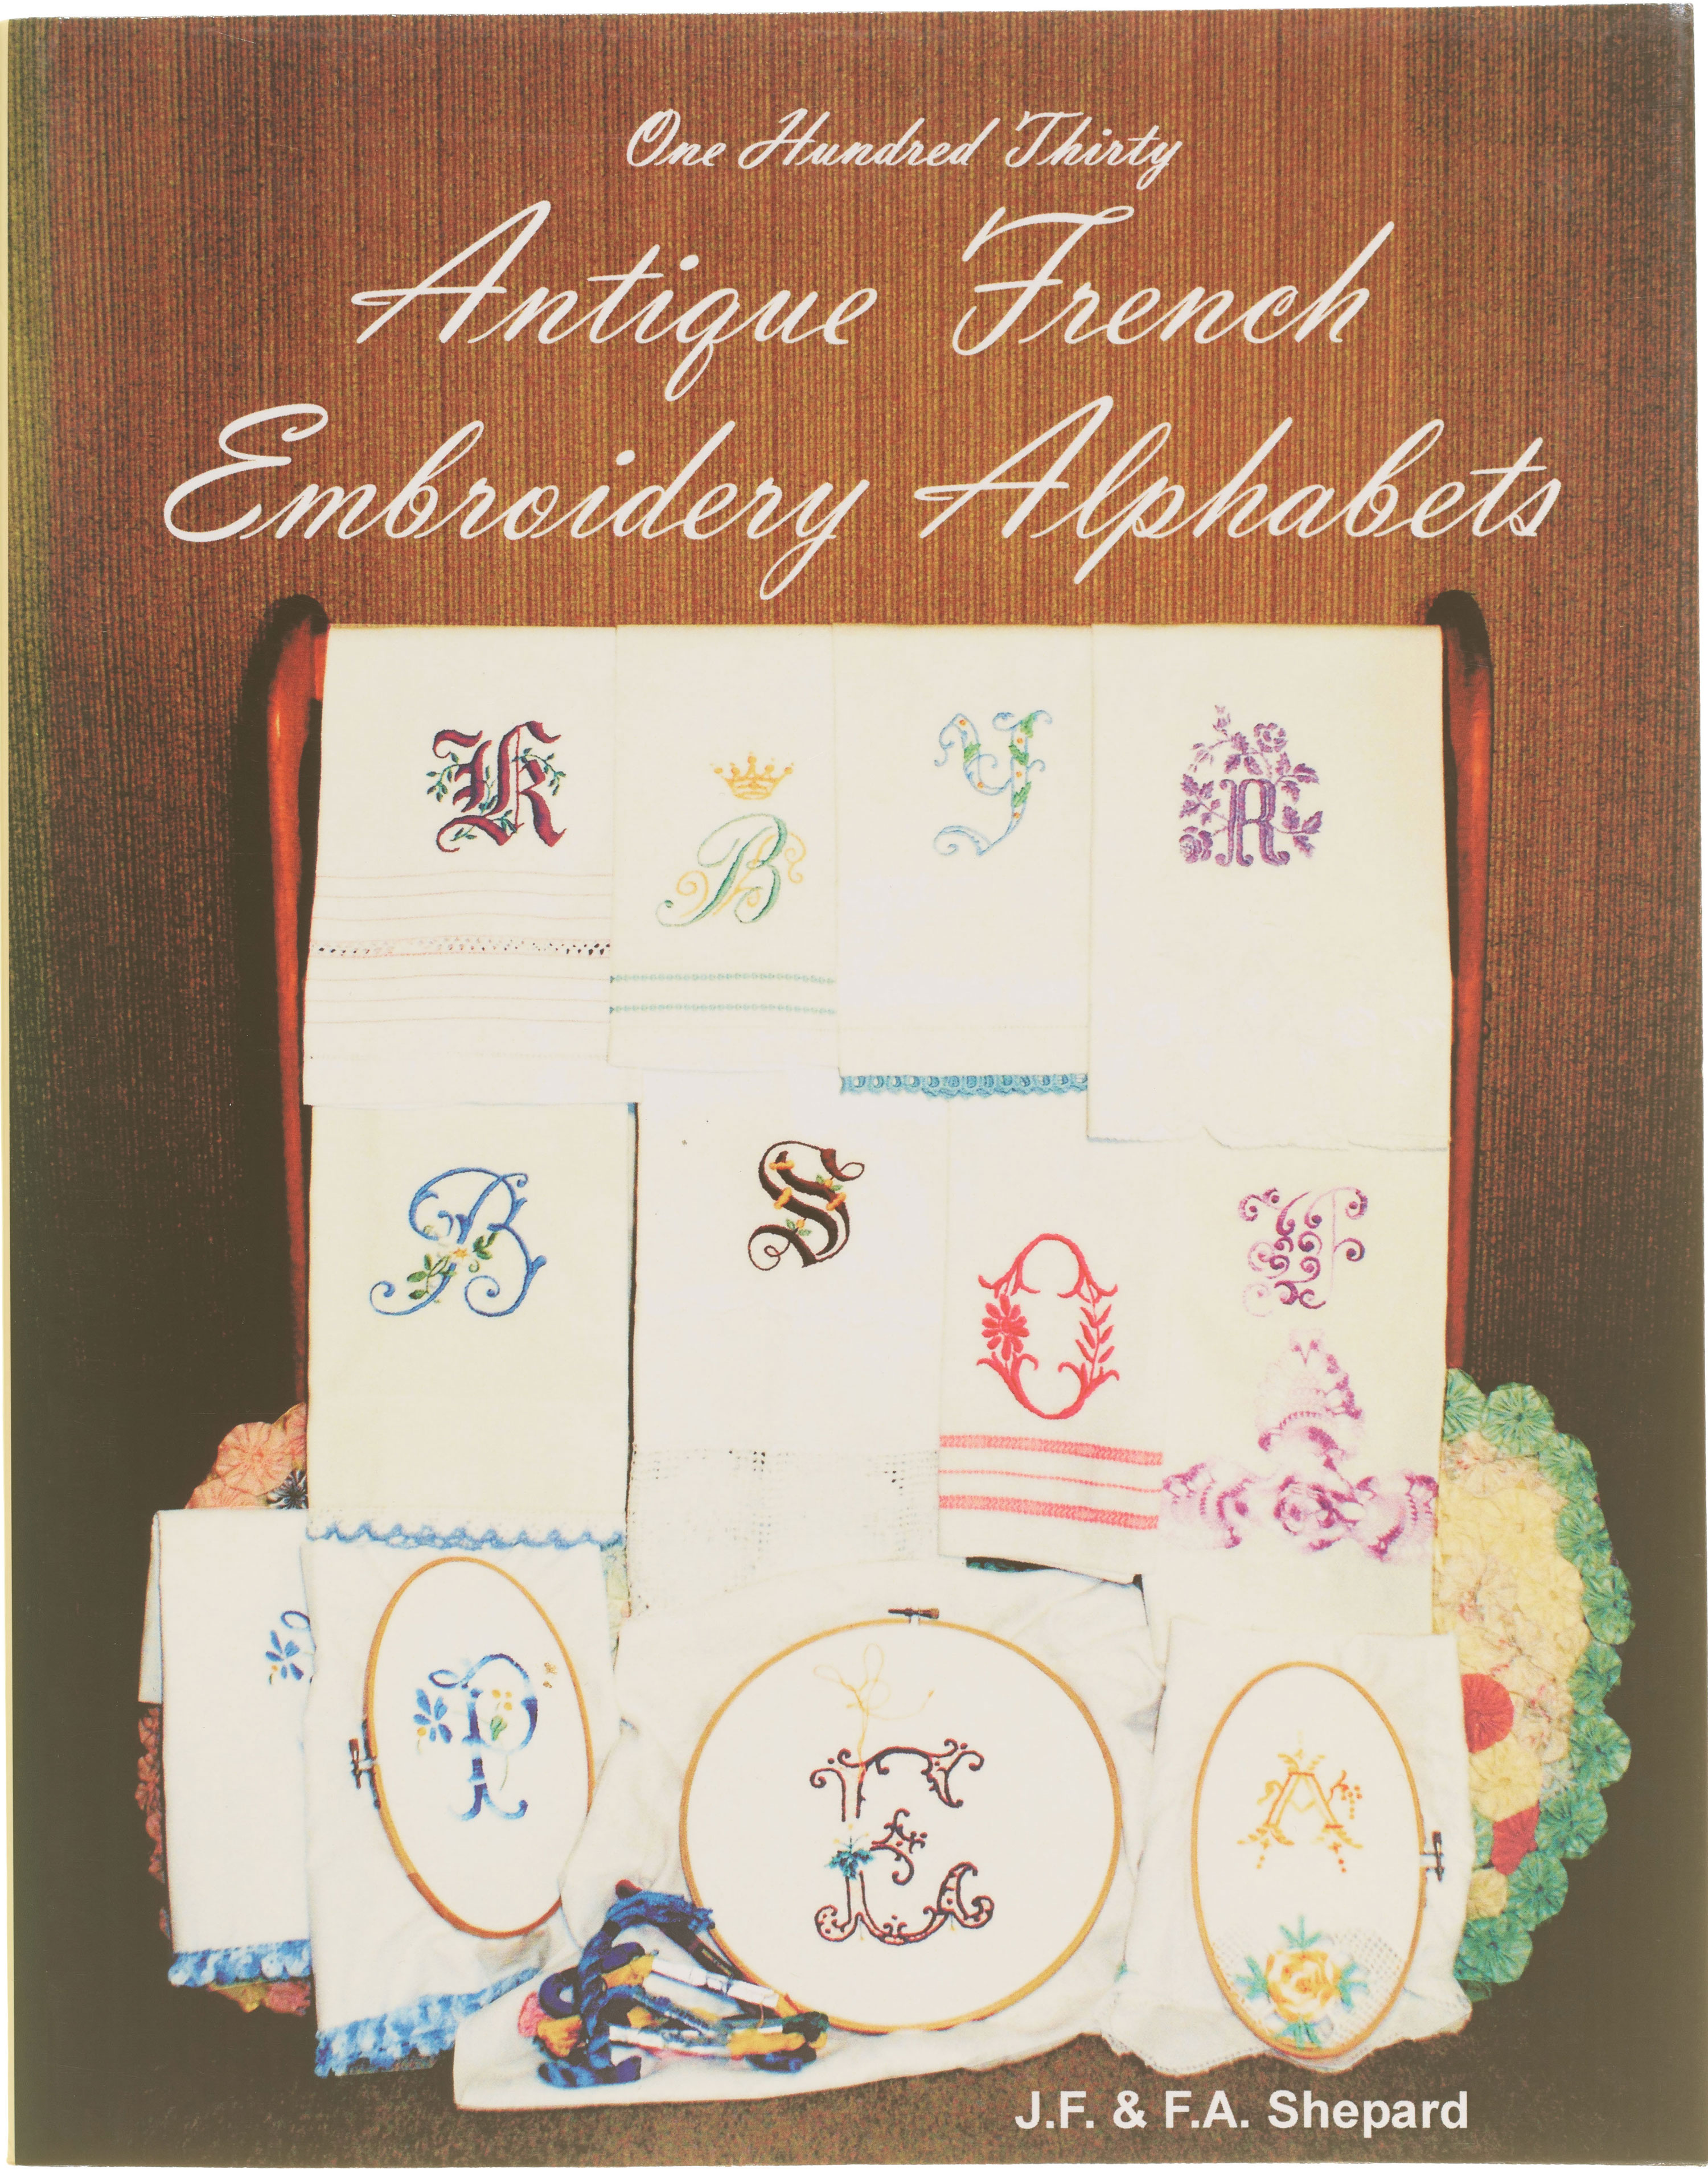 Cover for Alphabets for Embroidering on Canvas